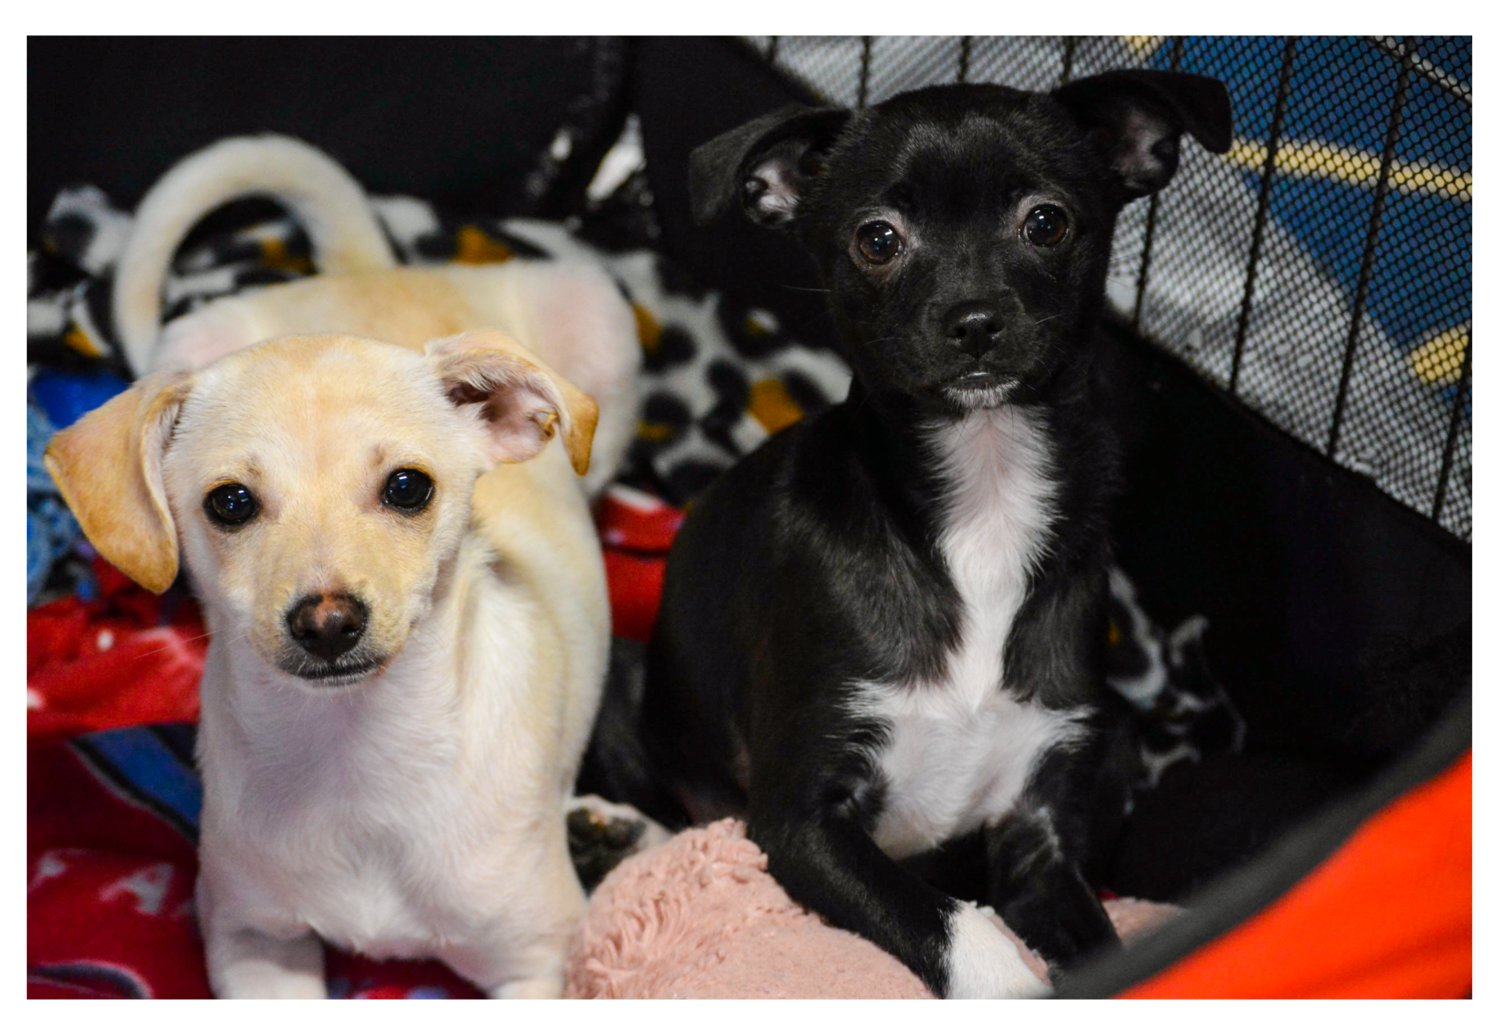 Kenny, left, and Kenzie are four-month-old Chihuahua mixes waiting for their adoptive owners to bring them home. The puppies must first be spayed and neutered before leaving the shelter.